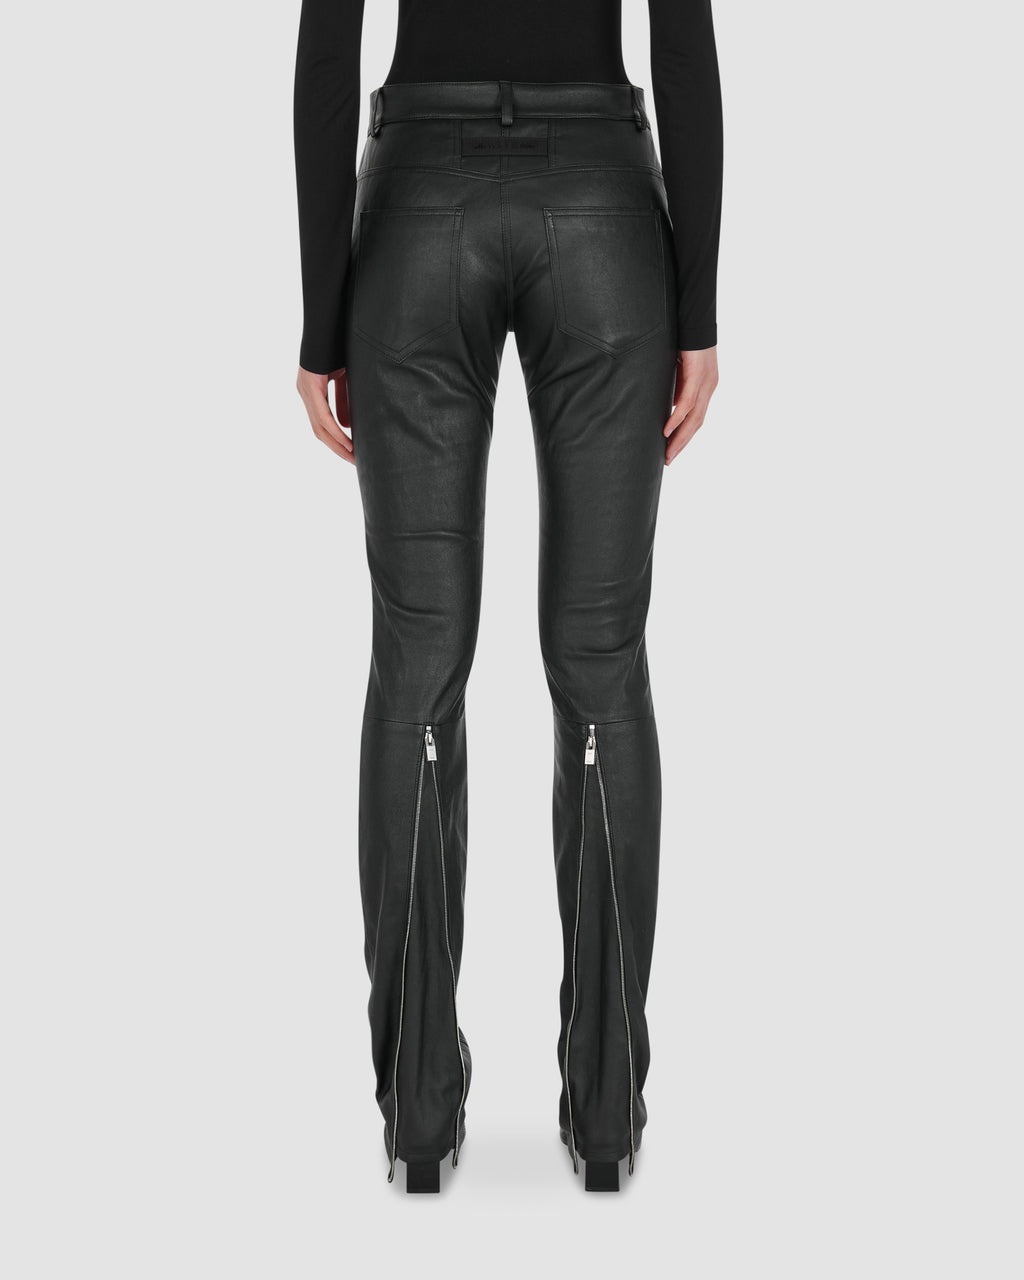 STRETCH LEATHER DEVILLE PANT - 7